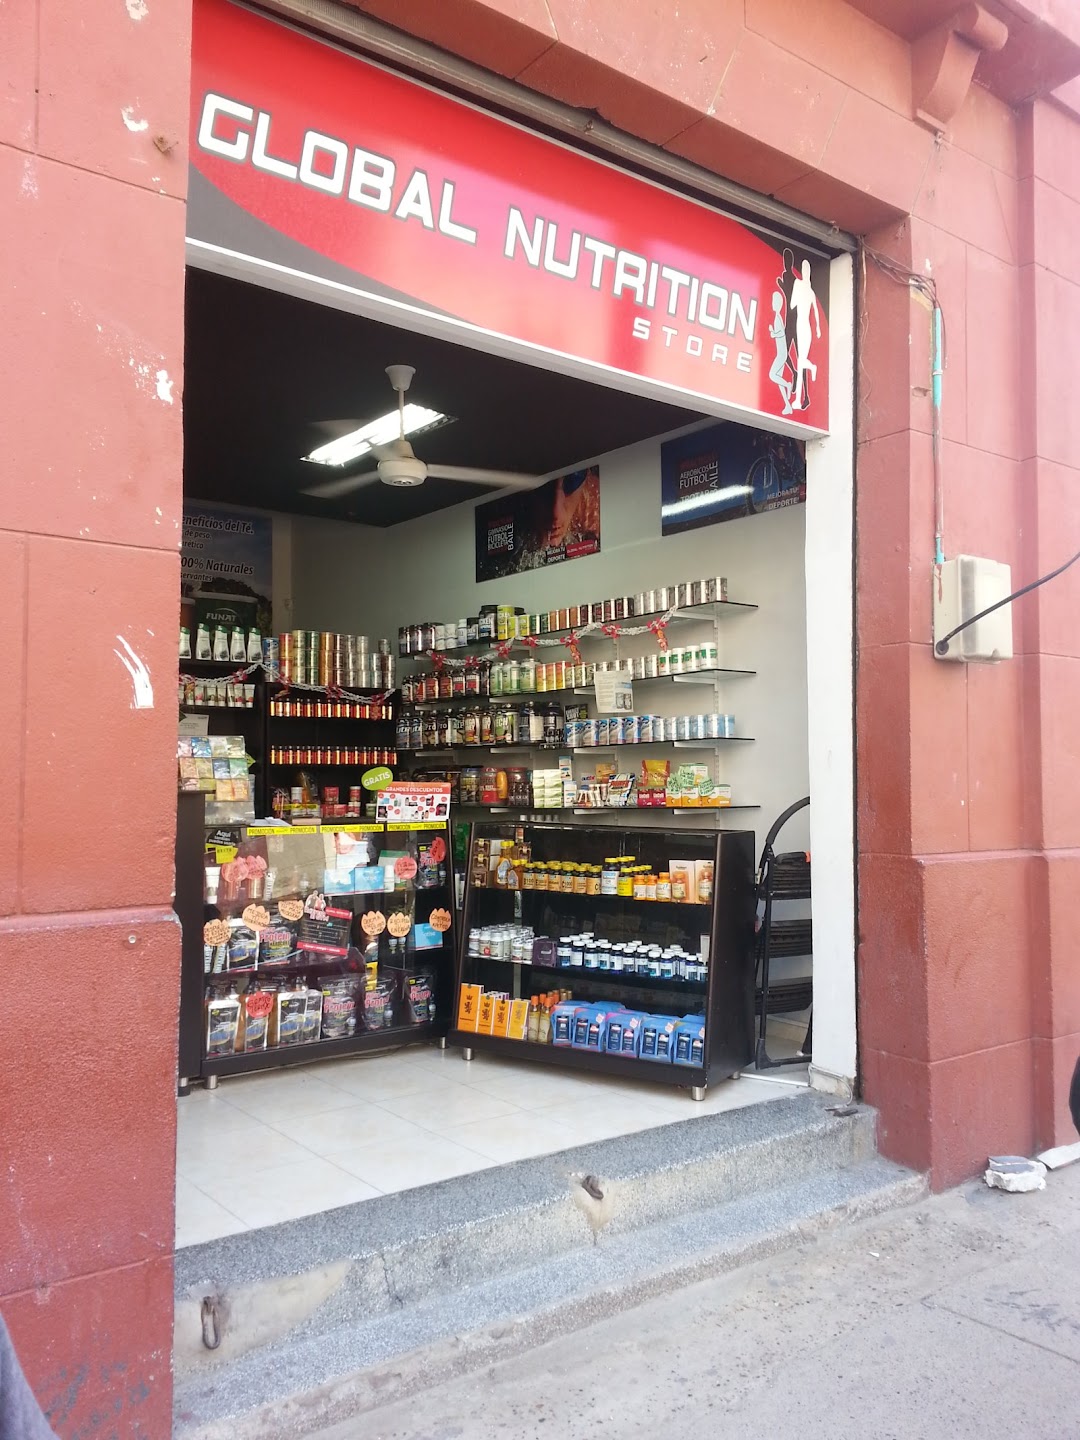 GLOBAL NUTRITION STORE